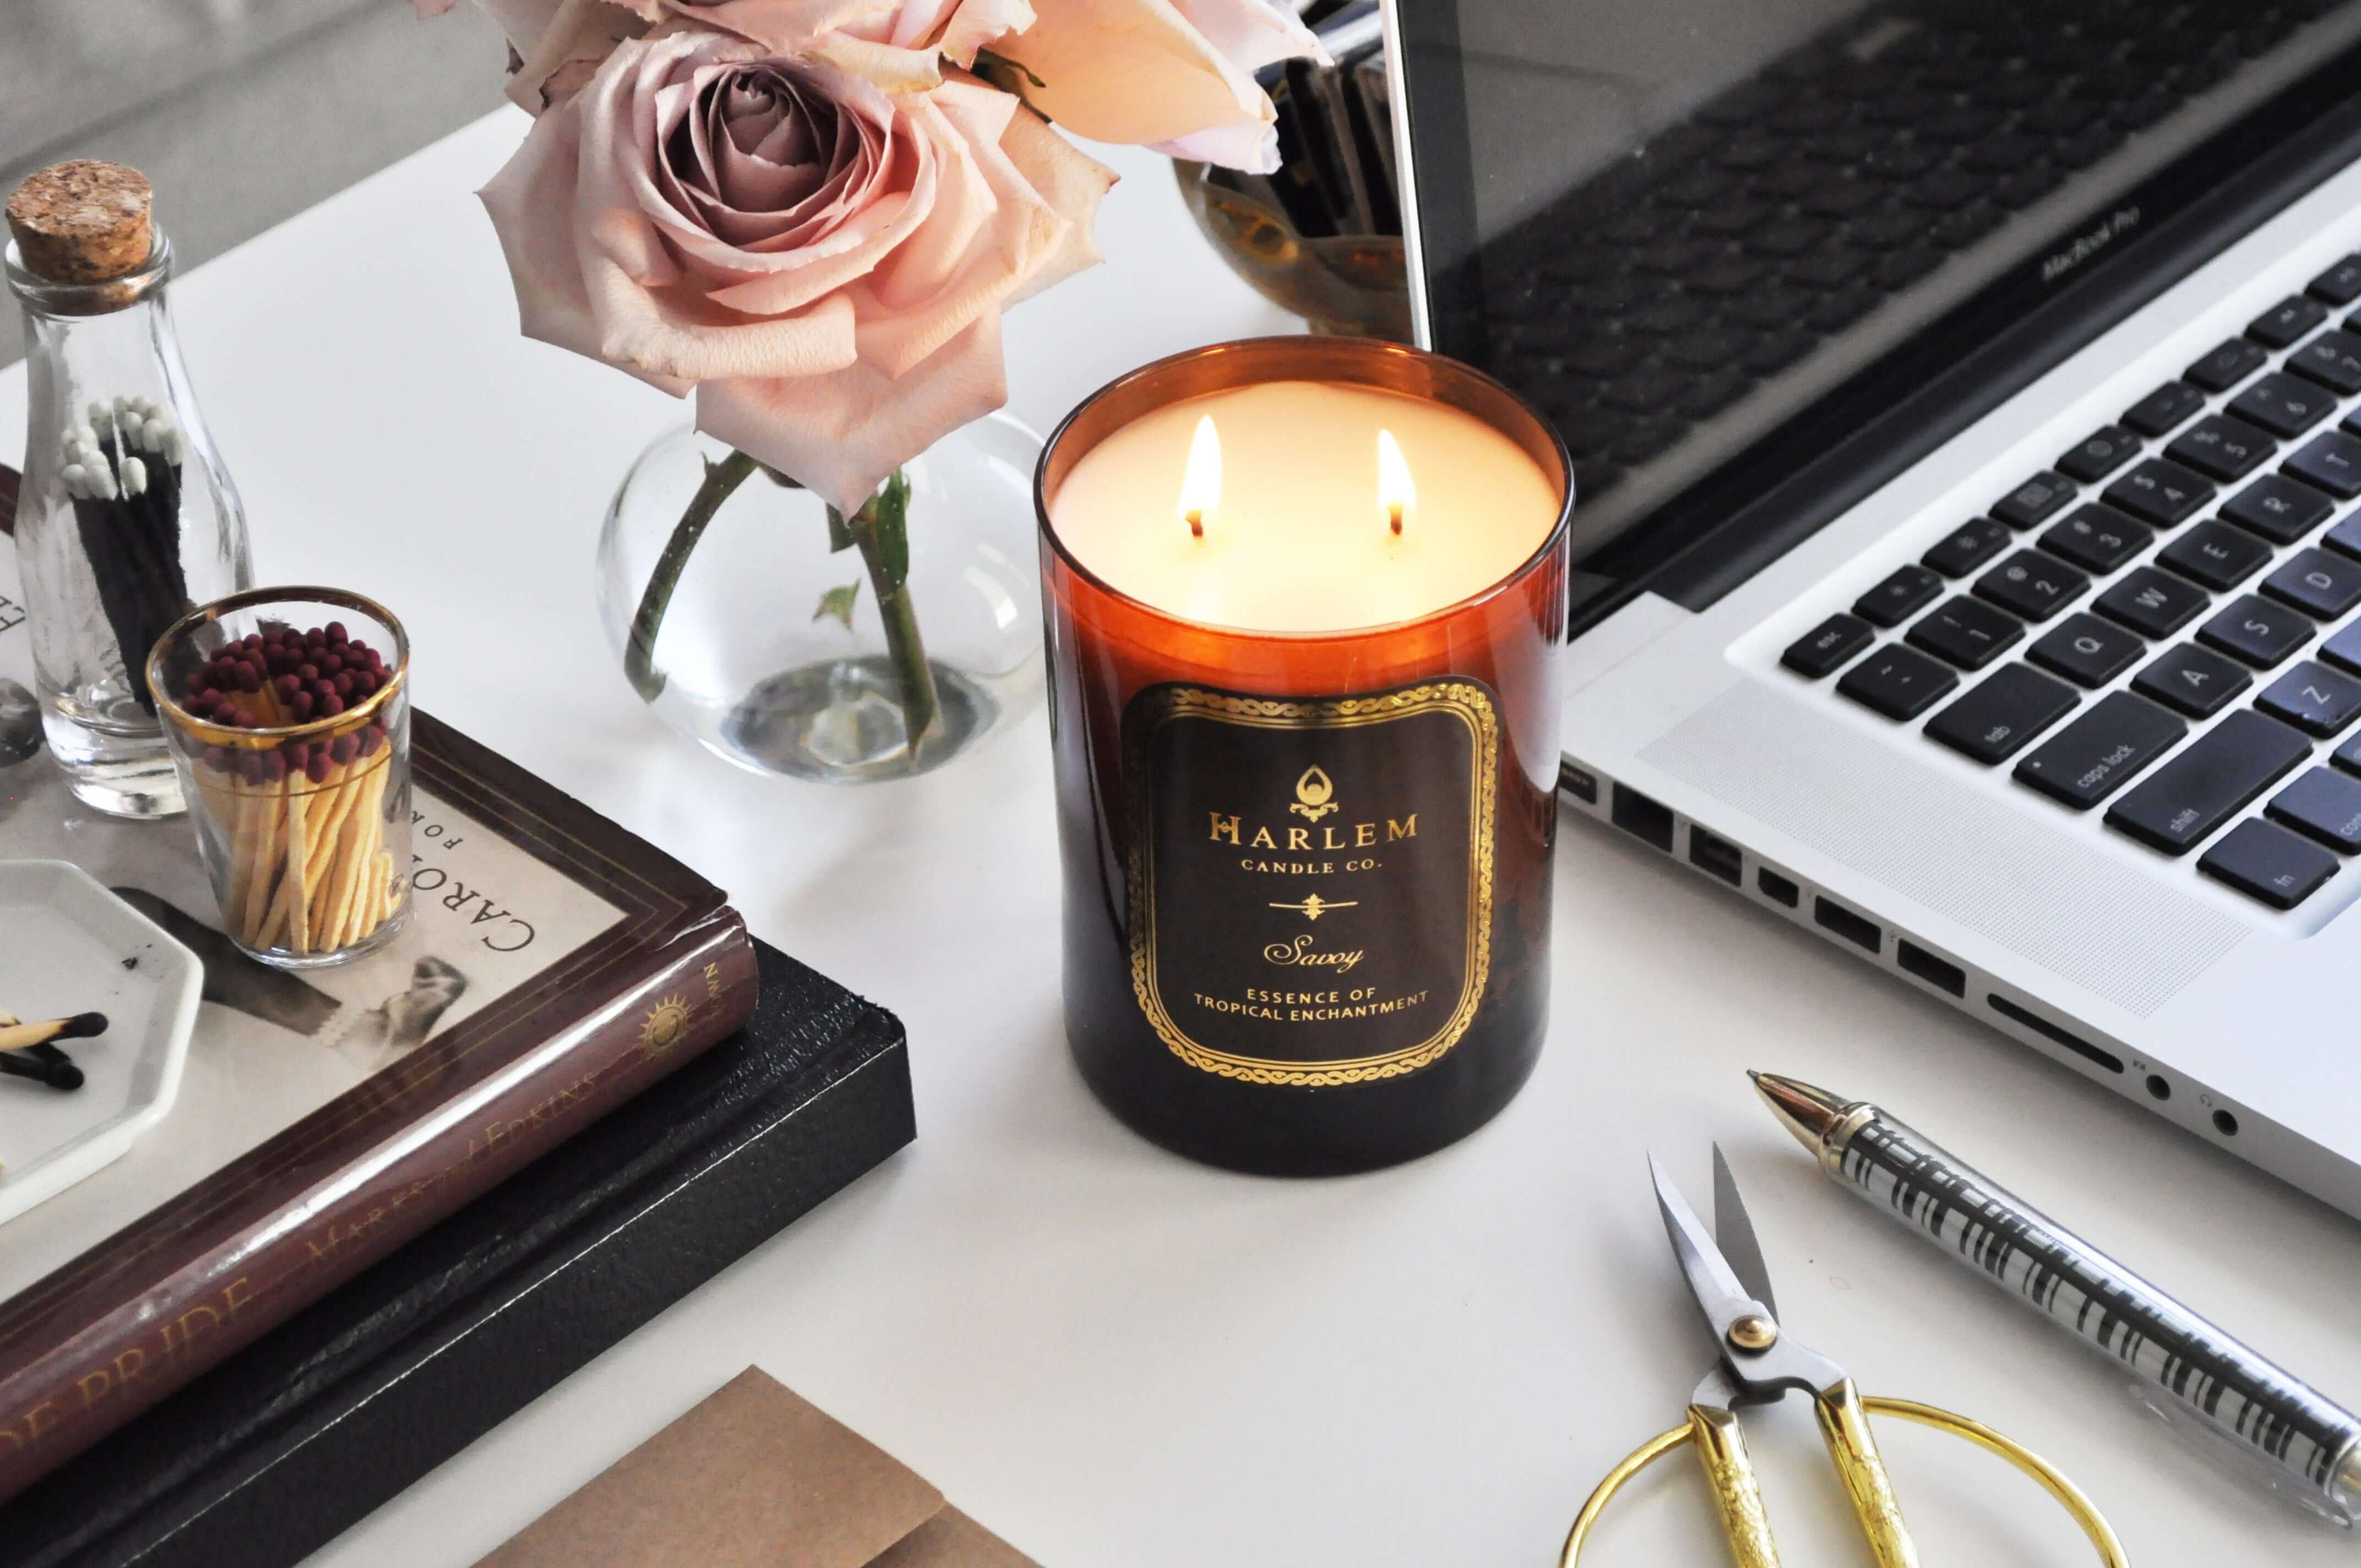 Our 12 oz Amber Savoy 2 wick, lit candle in a lifestyle image sitting on a desk next to a Mac Book Pro Laptop, some books, matches and some pink roses in a vase.